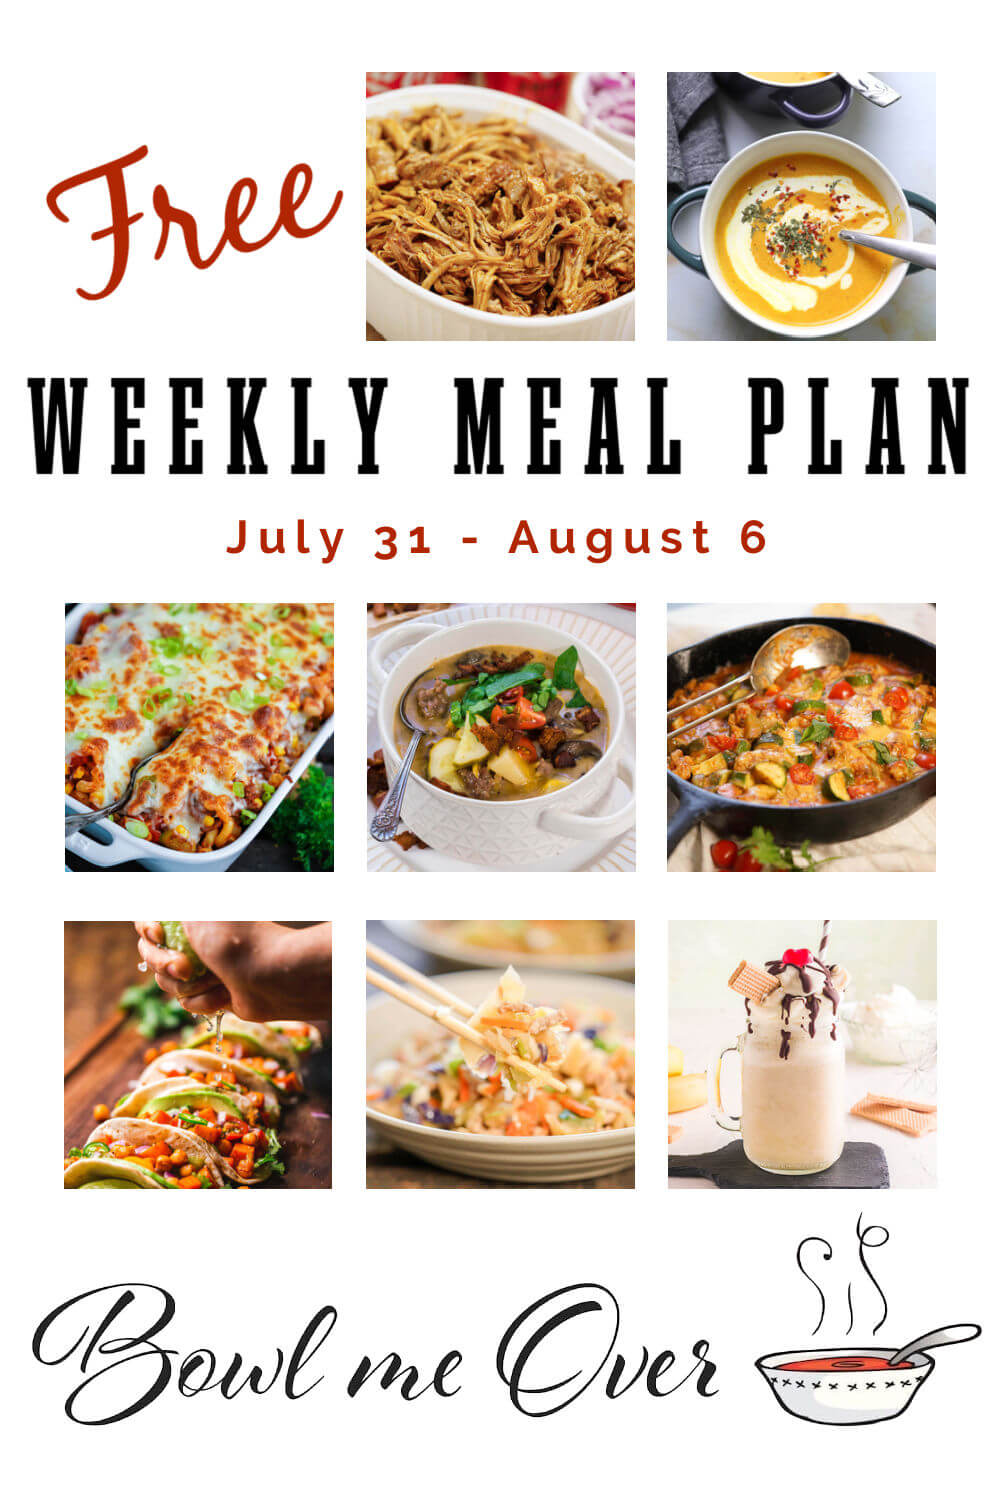 Collage of photos for weekly meal plan 31, with print overlay for Pinterest.